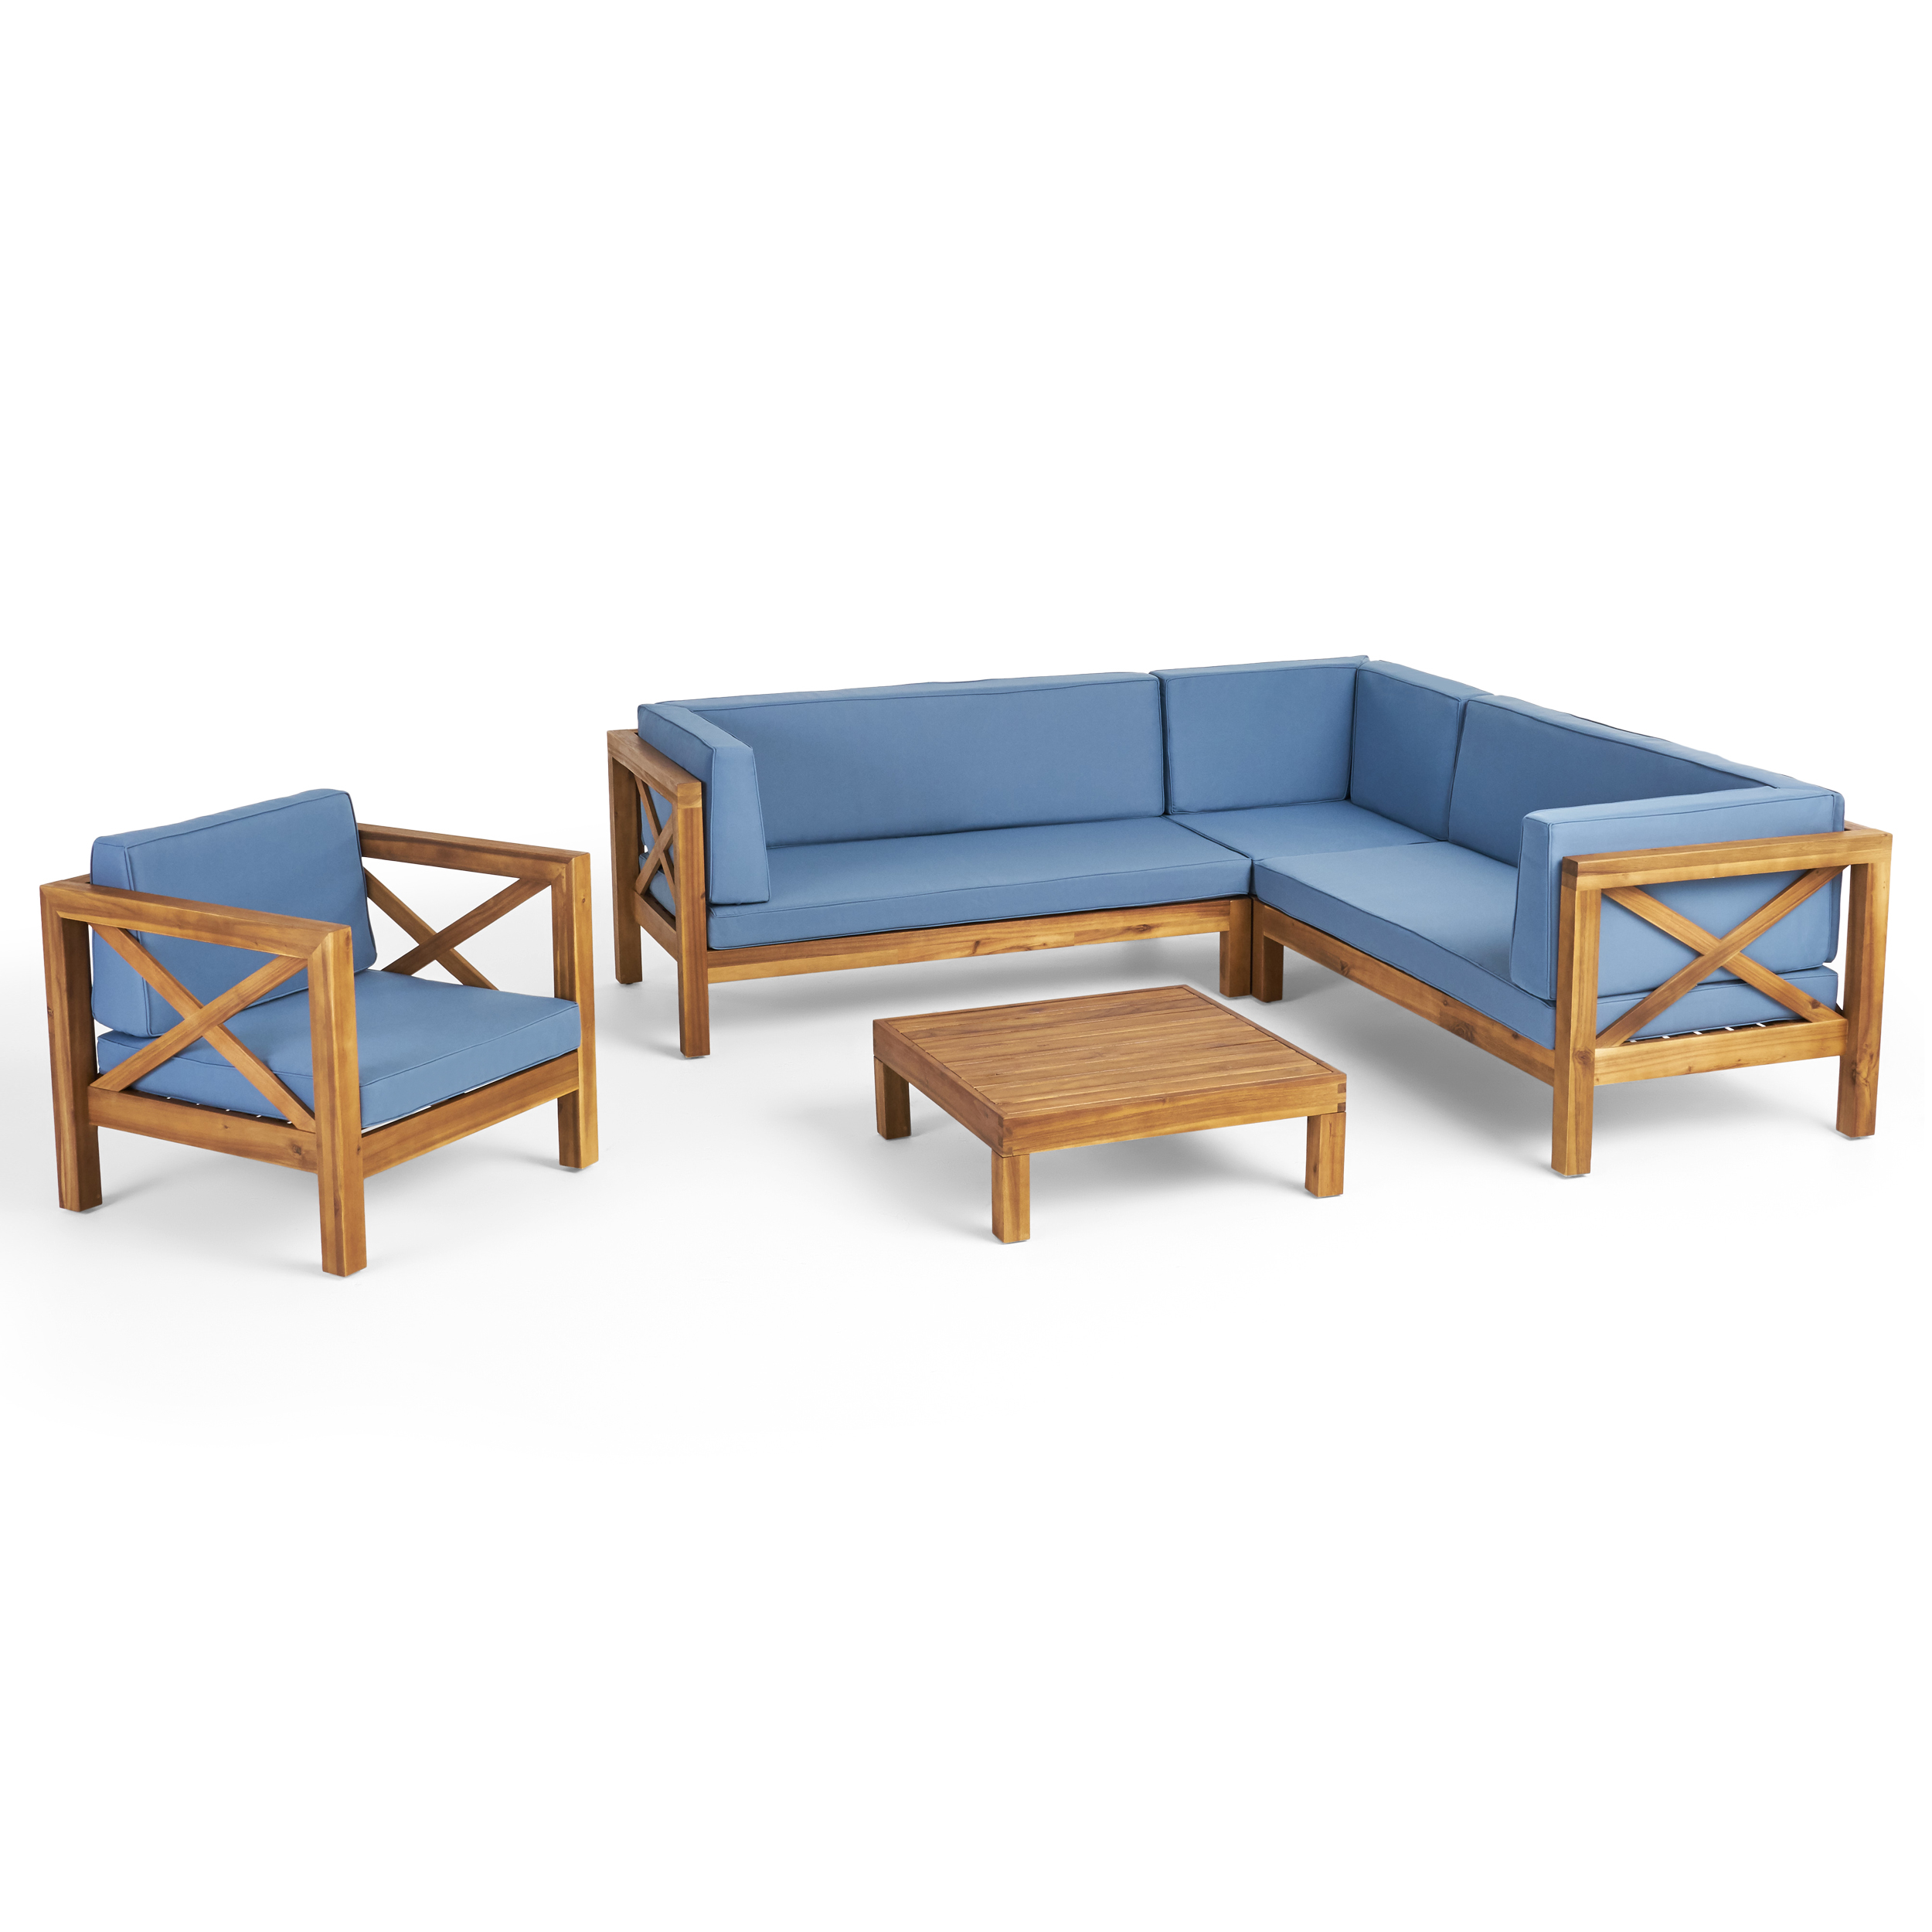 Morgan Outdoor 6 Seater Acacia Wood Sectional Sofa and Club Chair Set - teak finish + blue